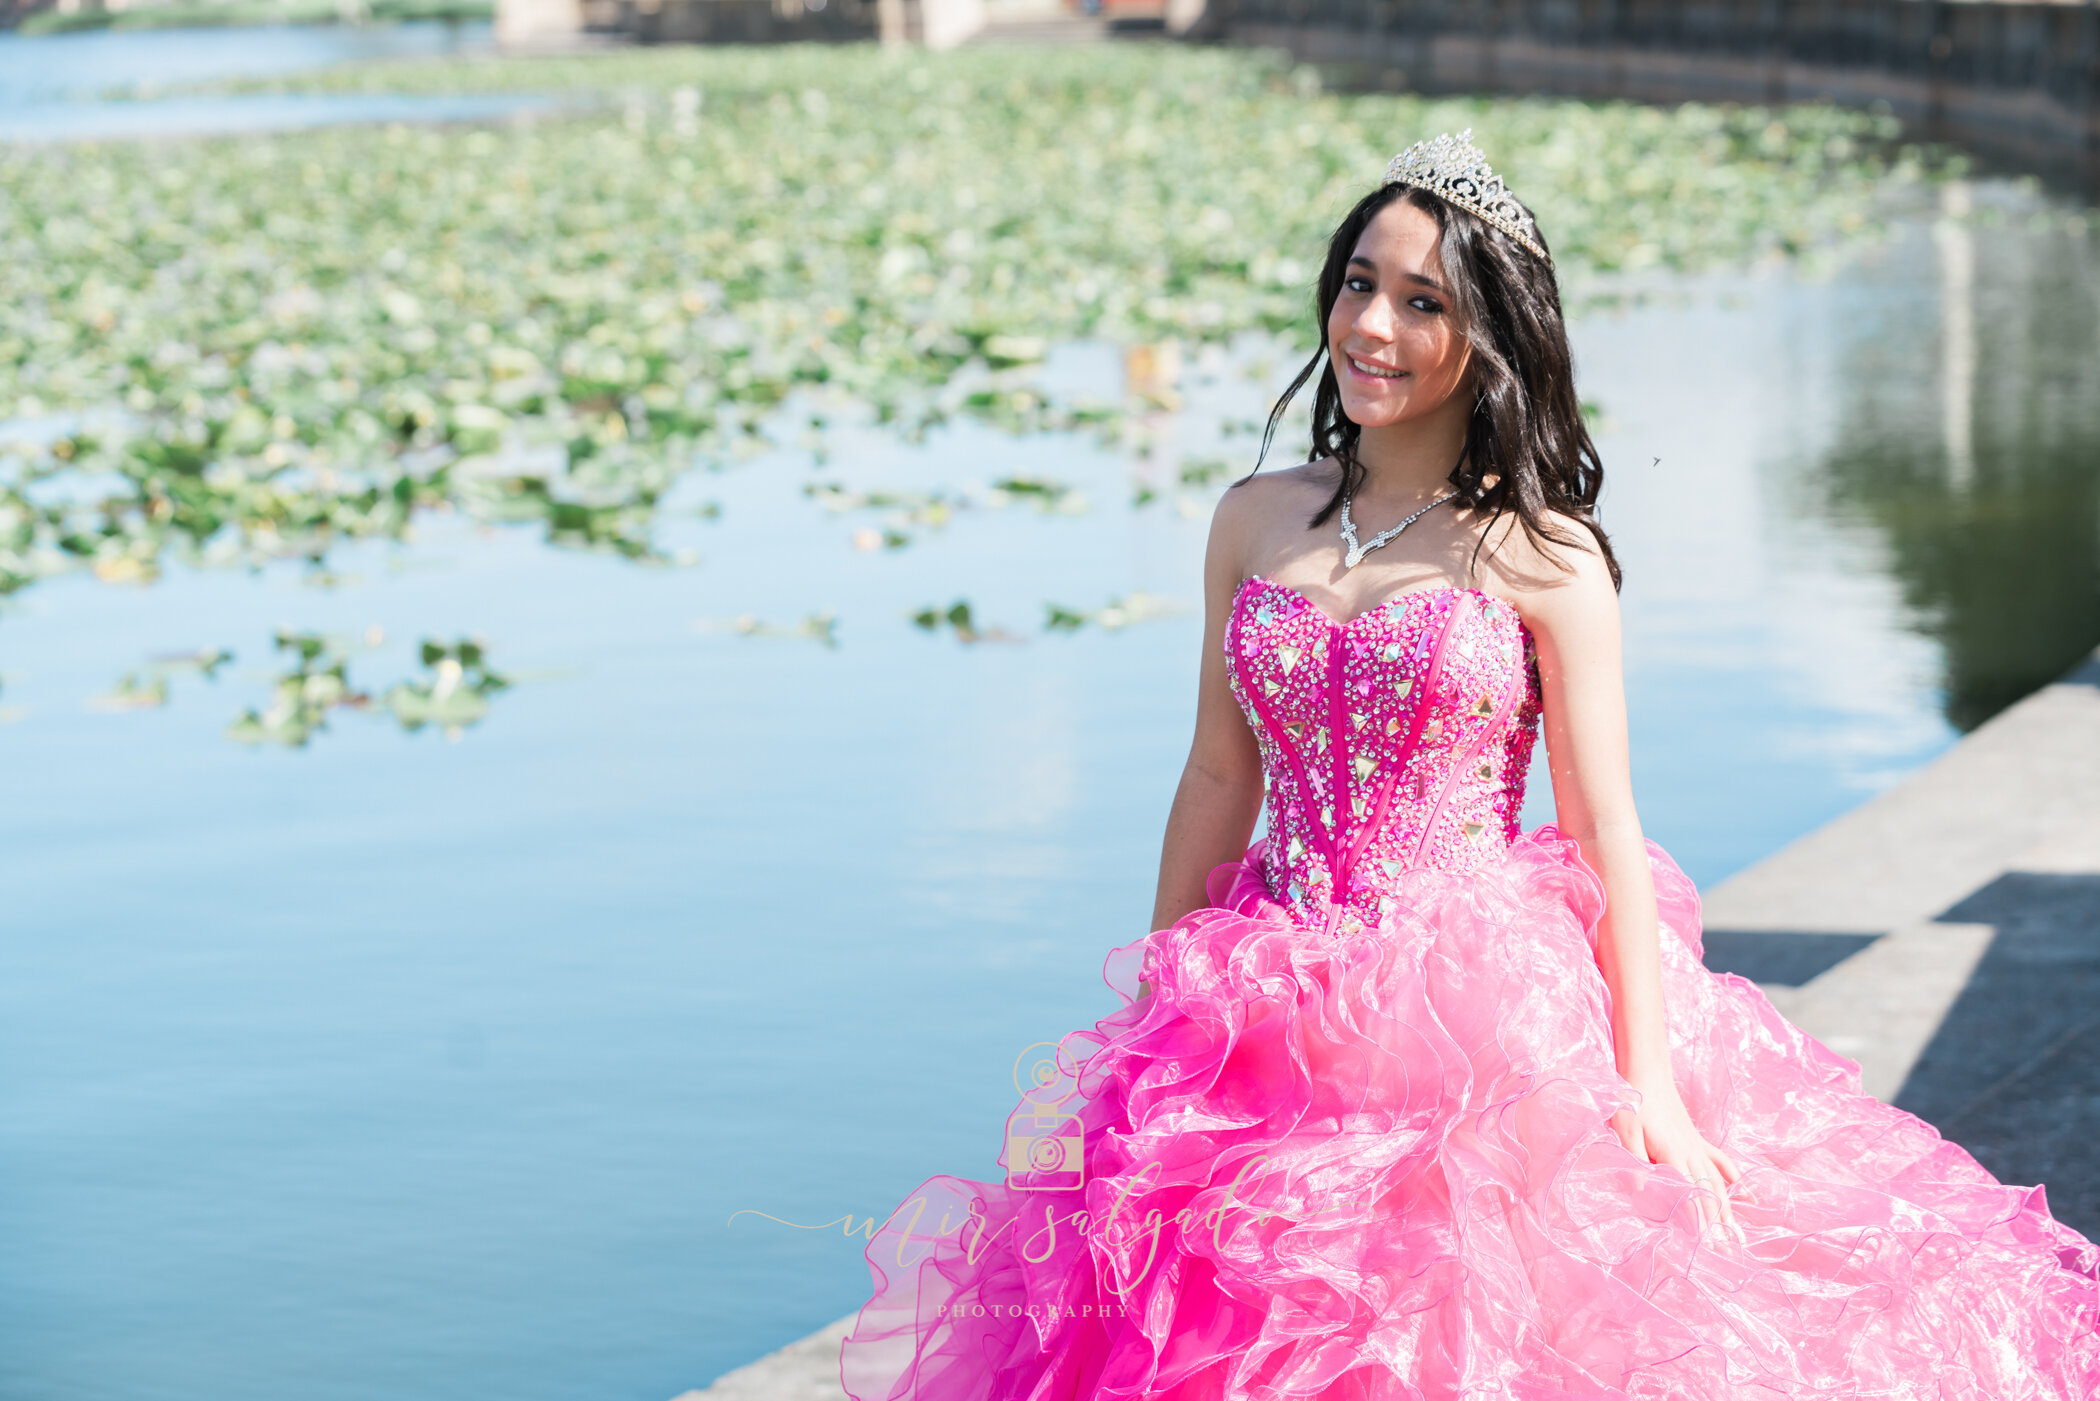 botanical-garden-quince-photography, quince-photo-location, quince-portrait, quinceanera-portrait-photography